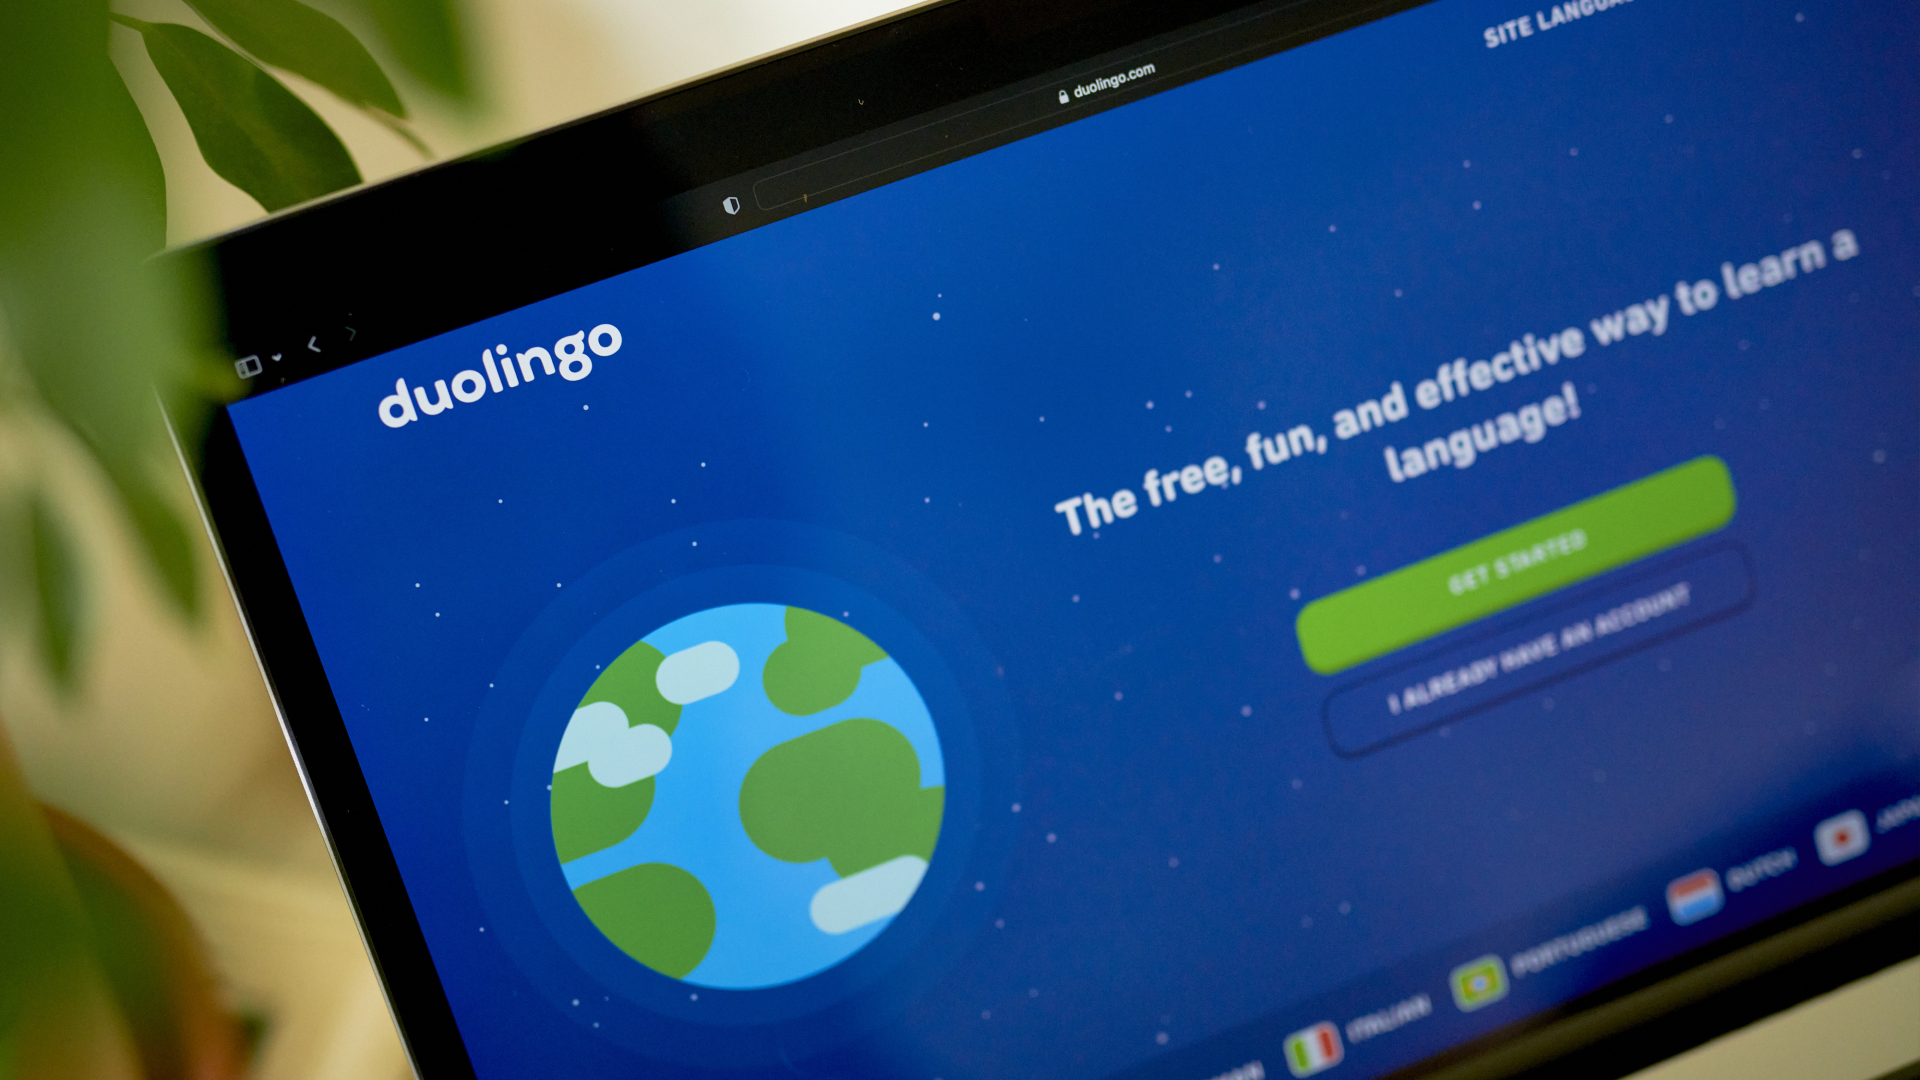 Turns out you can speedrun Duolingo, and someone did an entire course in 24 hours